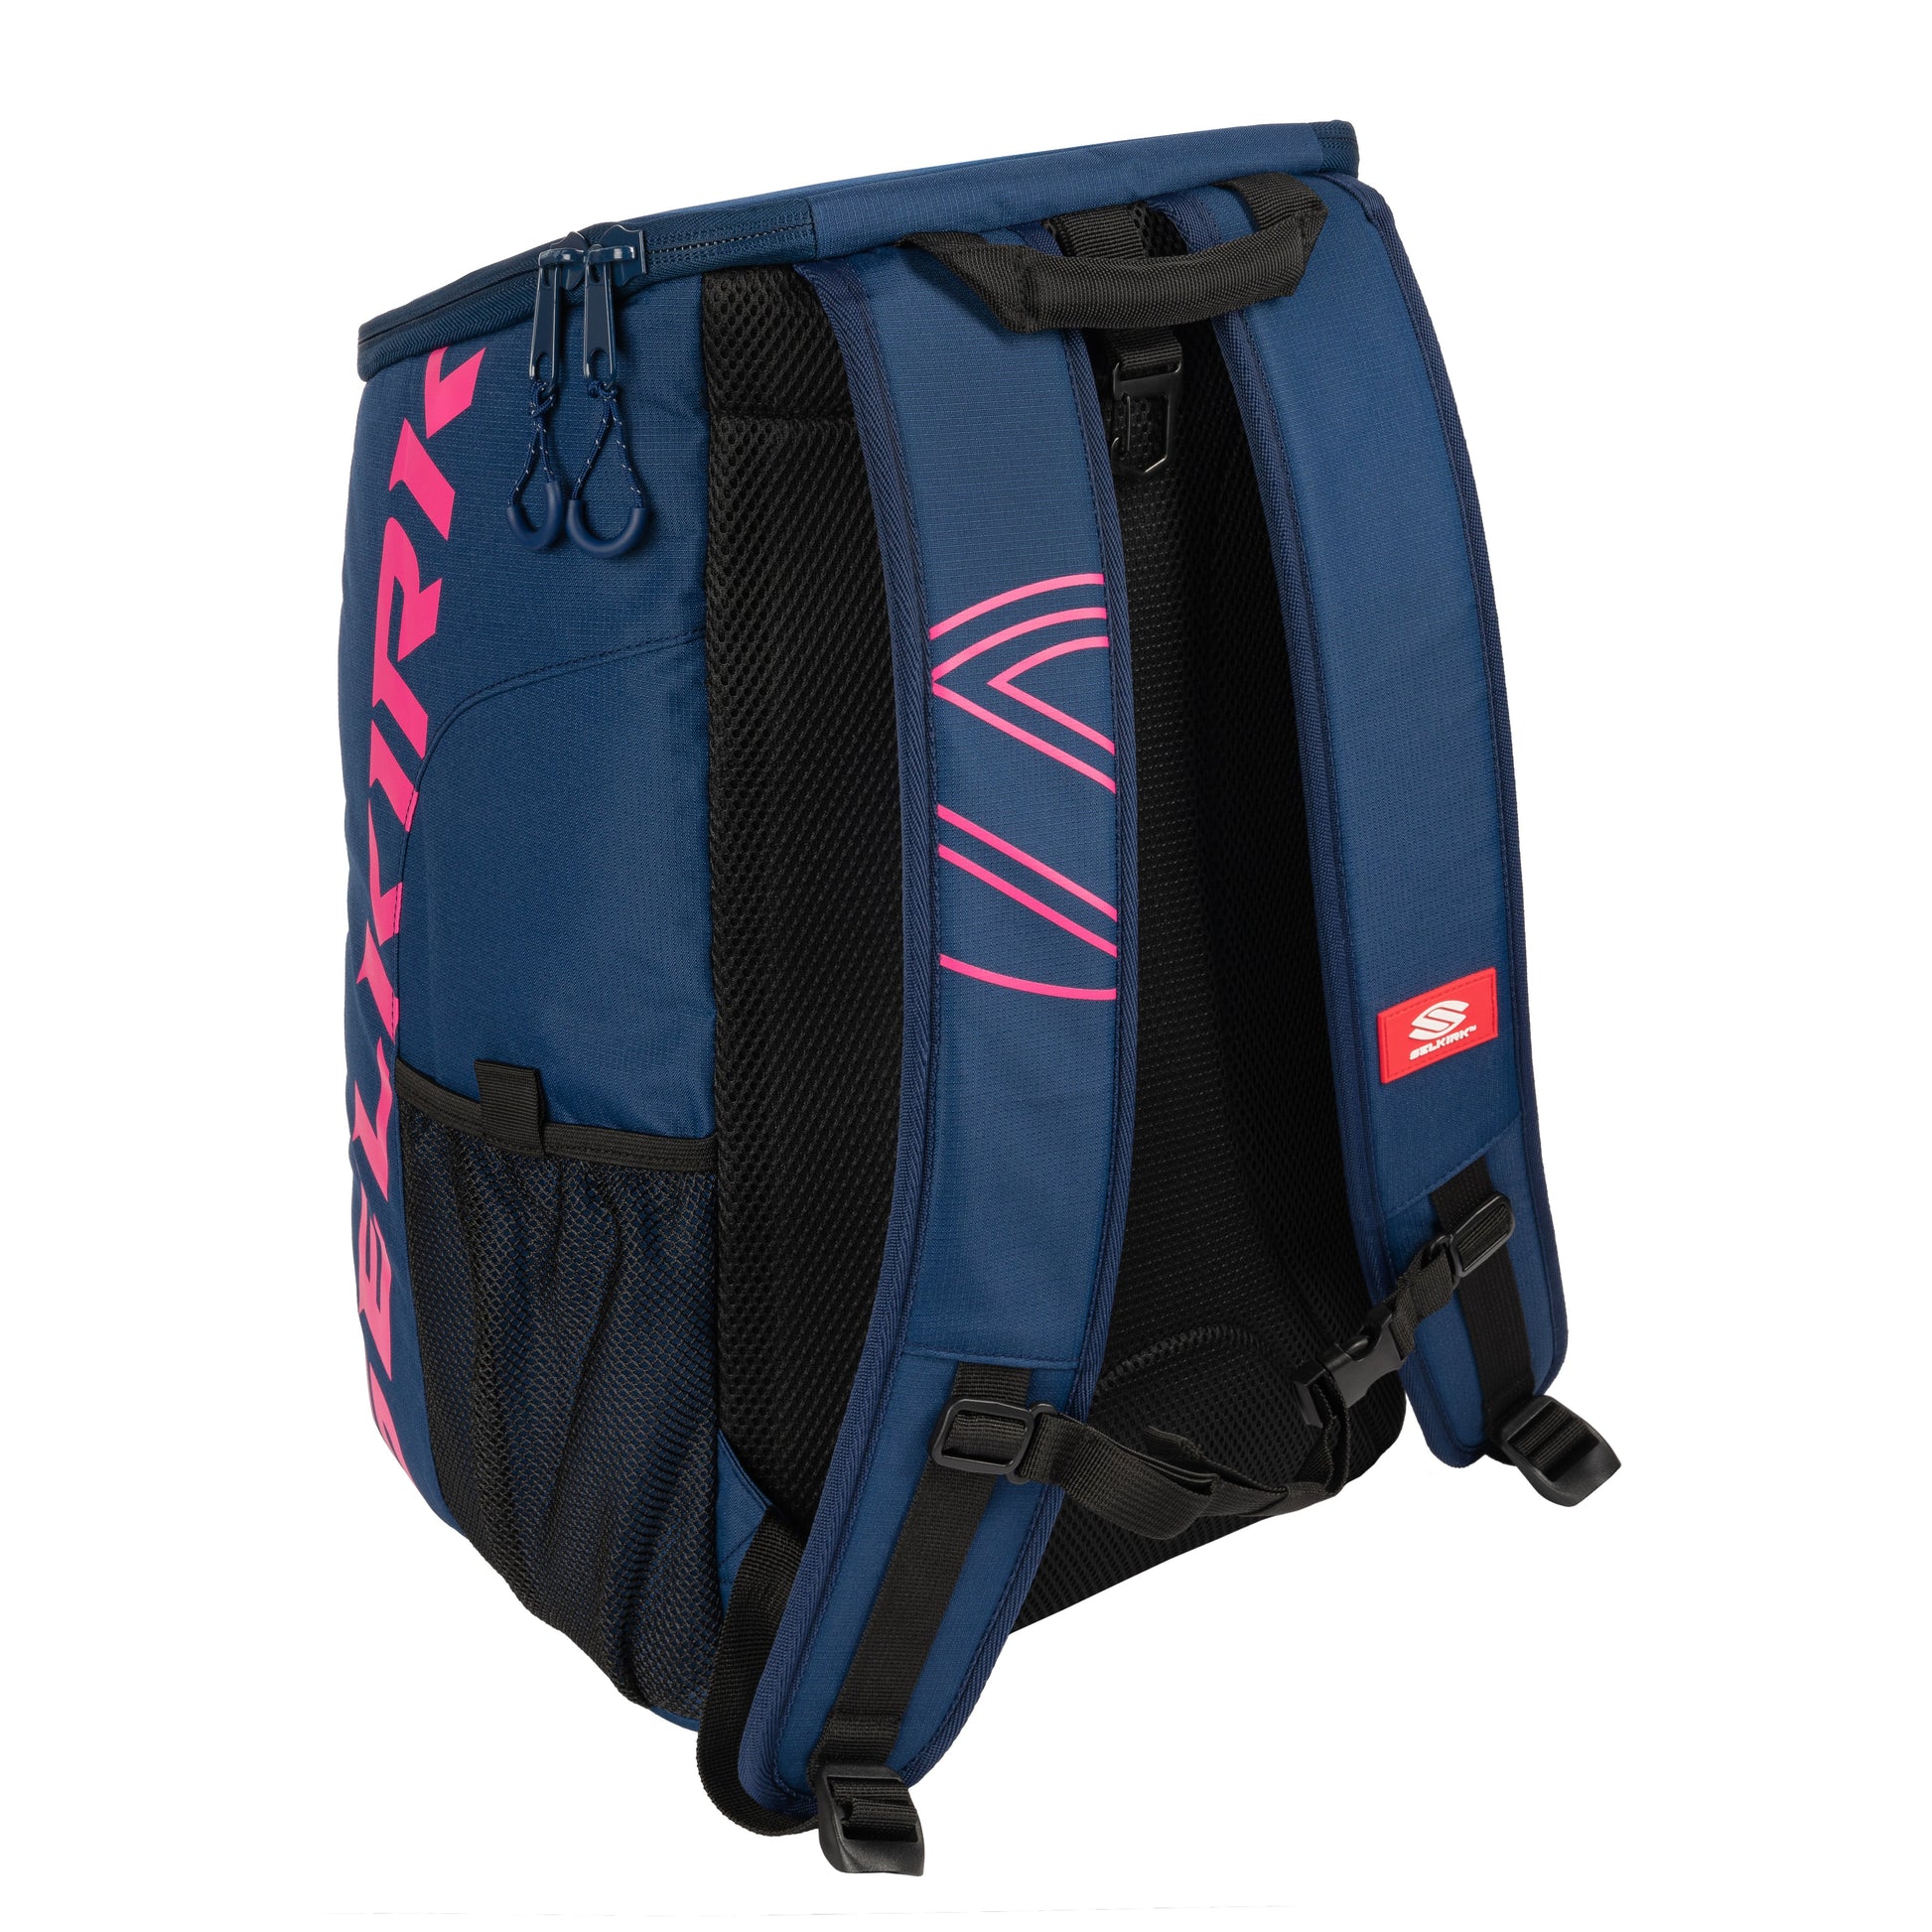 A Selkirk Core Series Team Backpack Pickleball Bag with a pink and blue design.